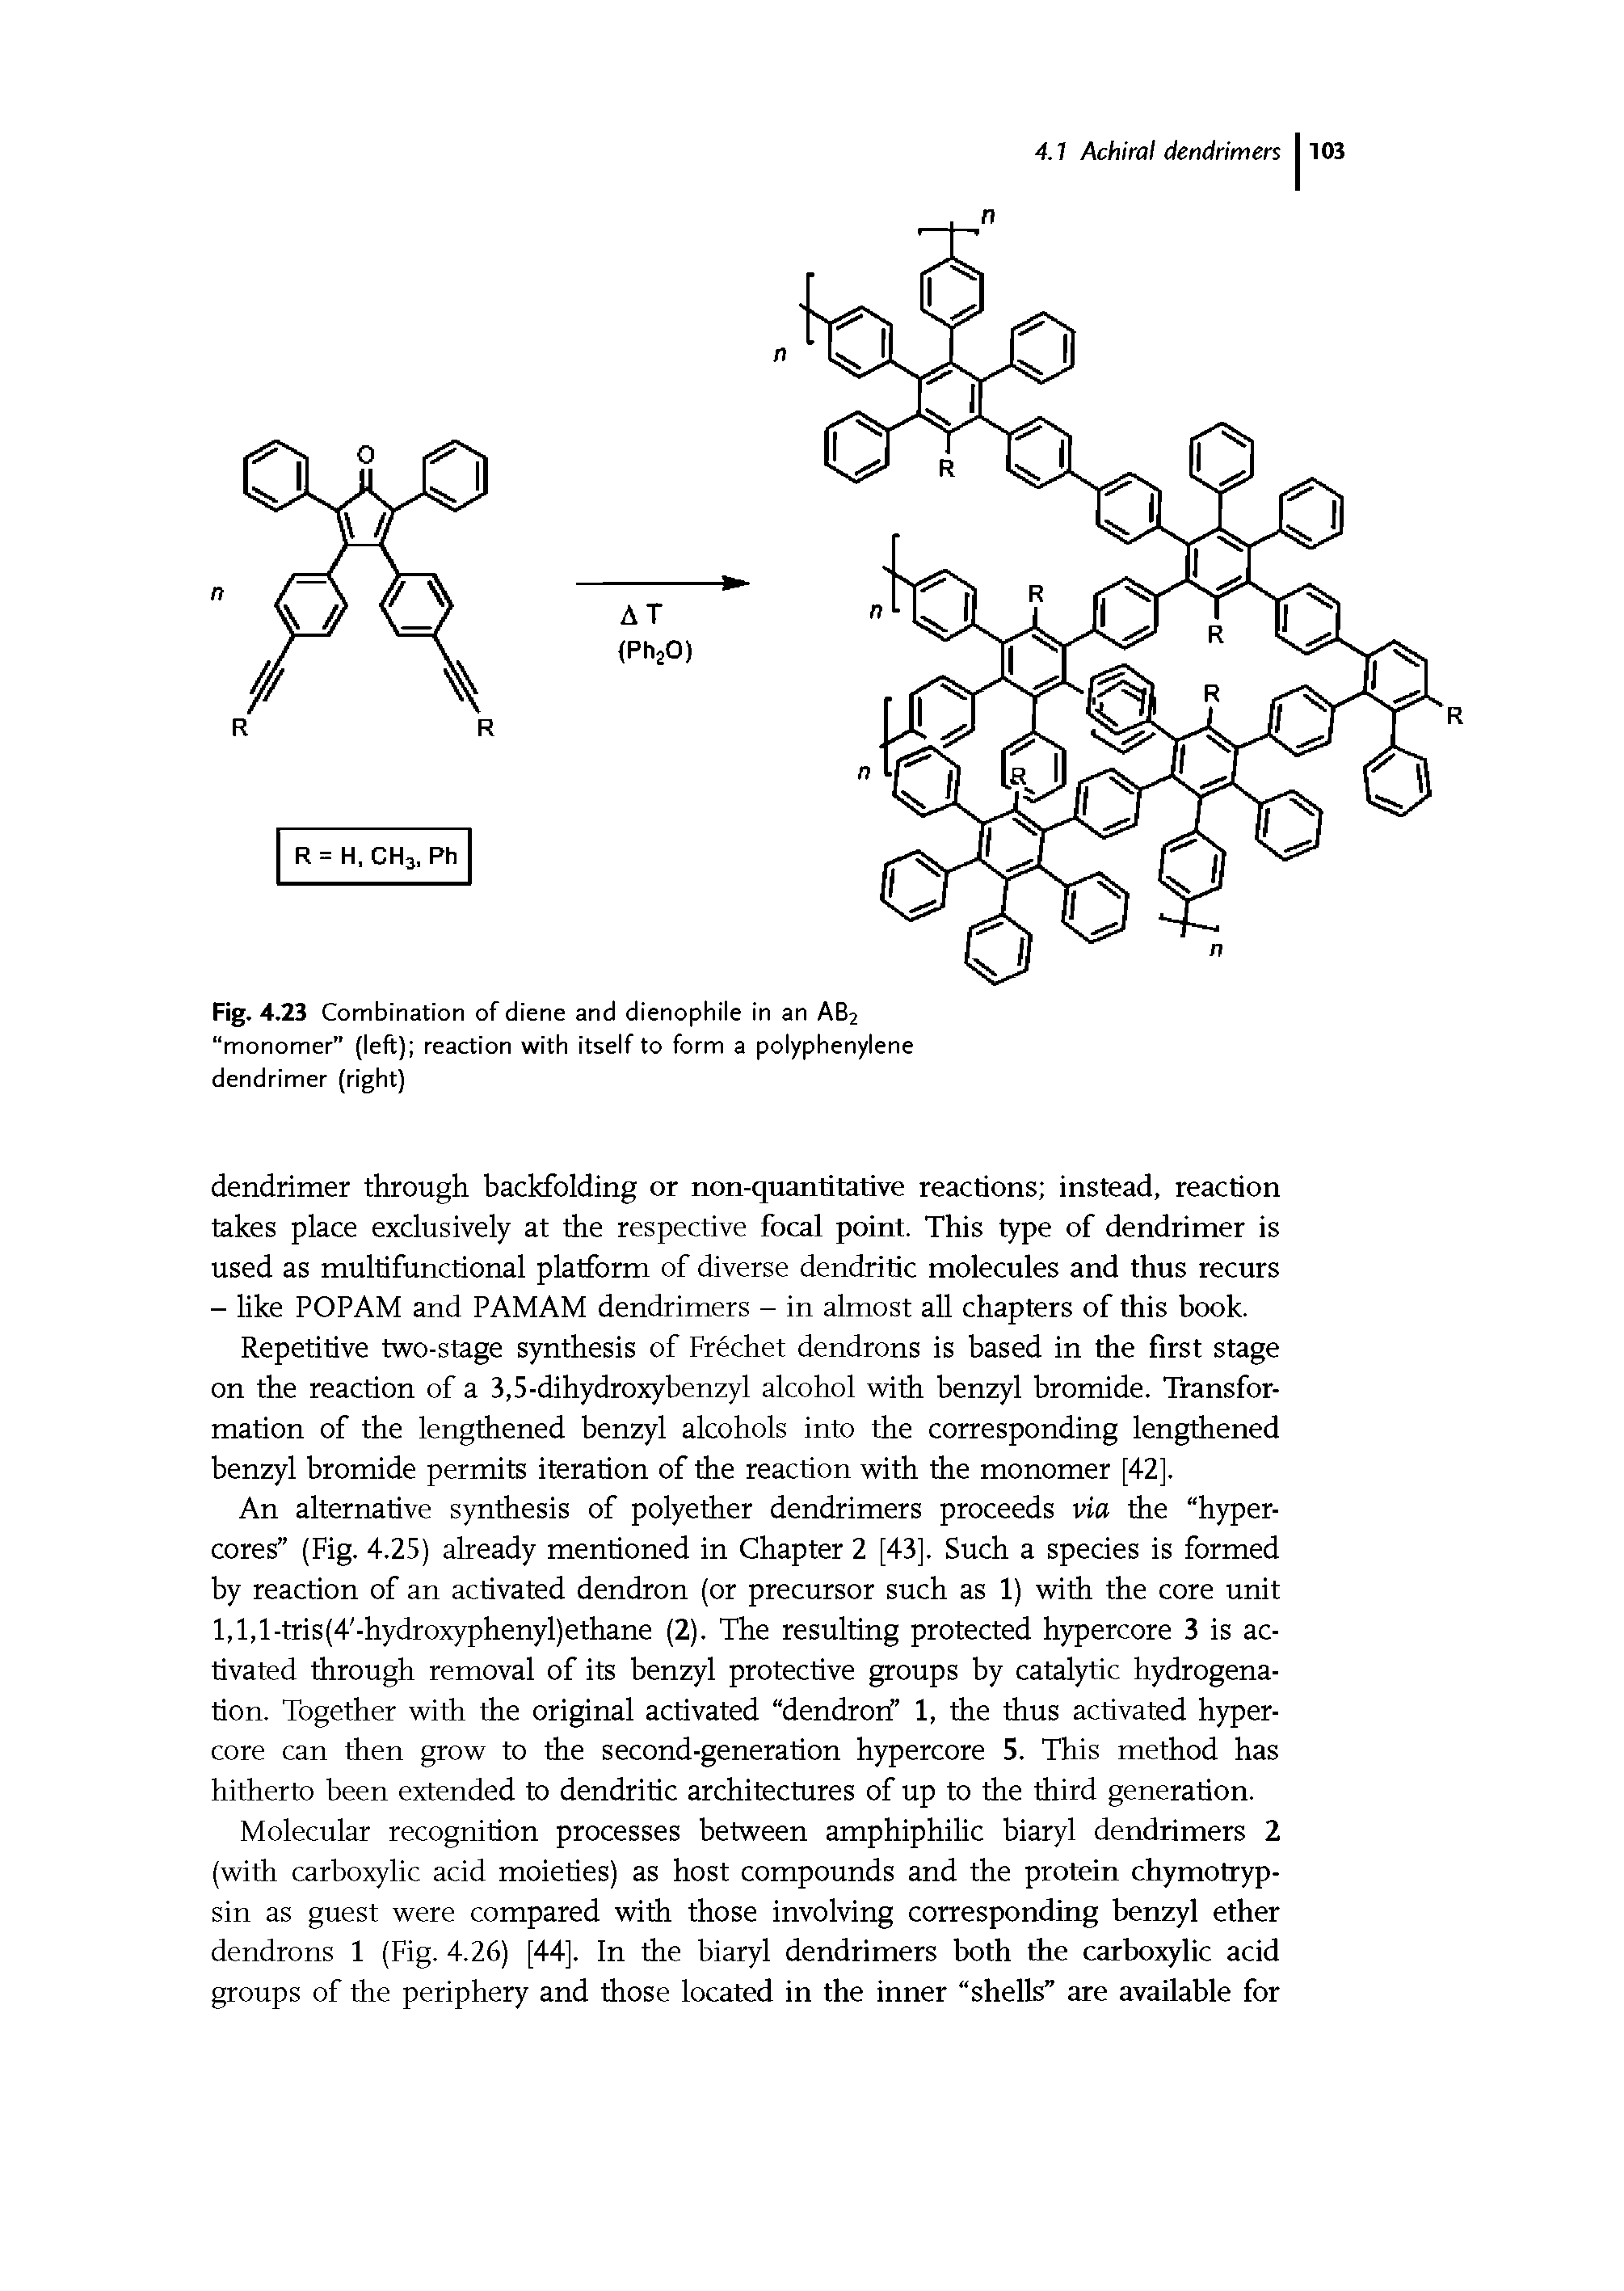 Fig. 4.23 Combination of diene and dienophile in an AB2 monomer (left) reaction with itself to form a polyphenylene dendrimer (right)...